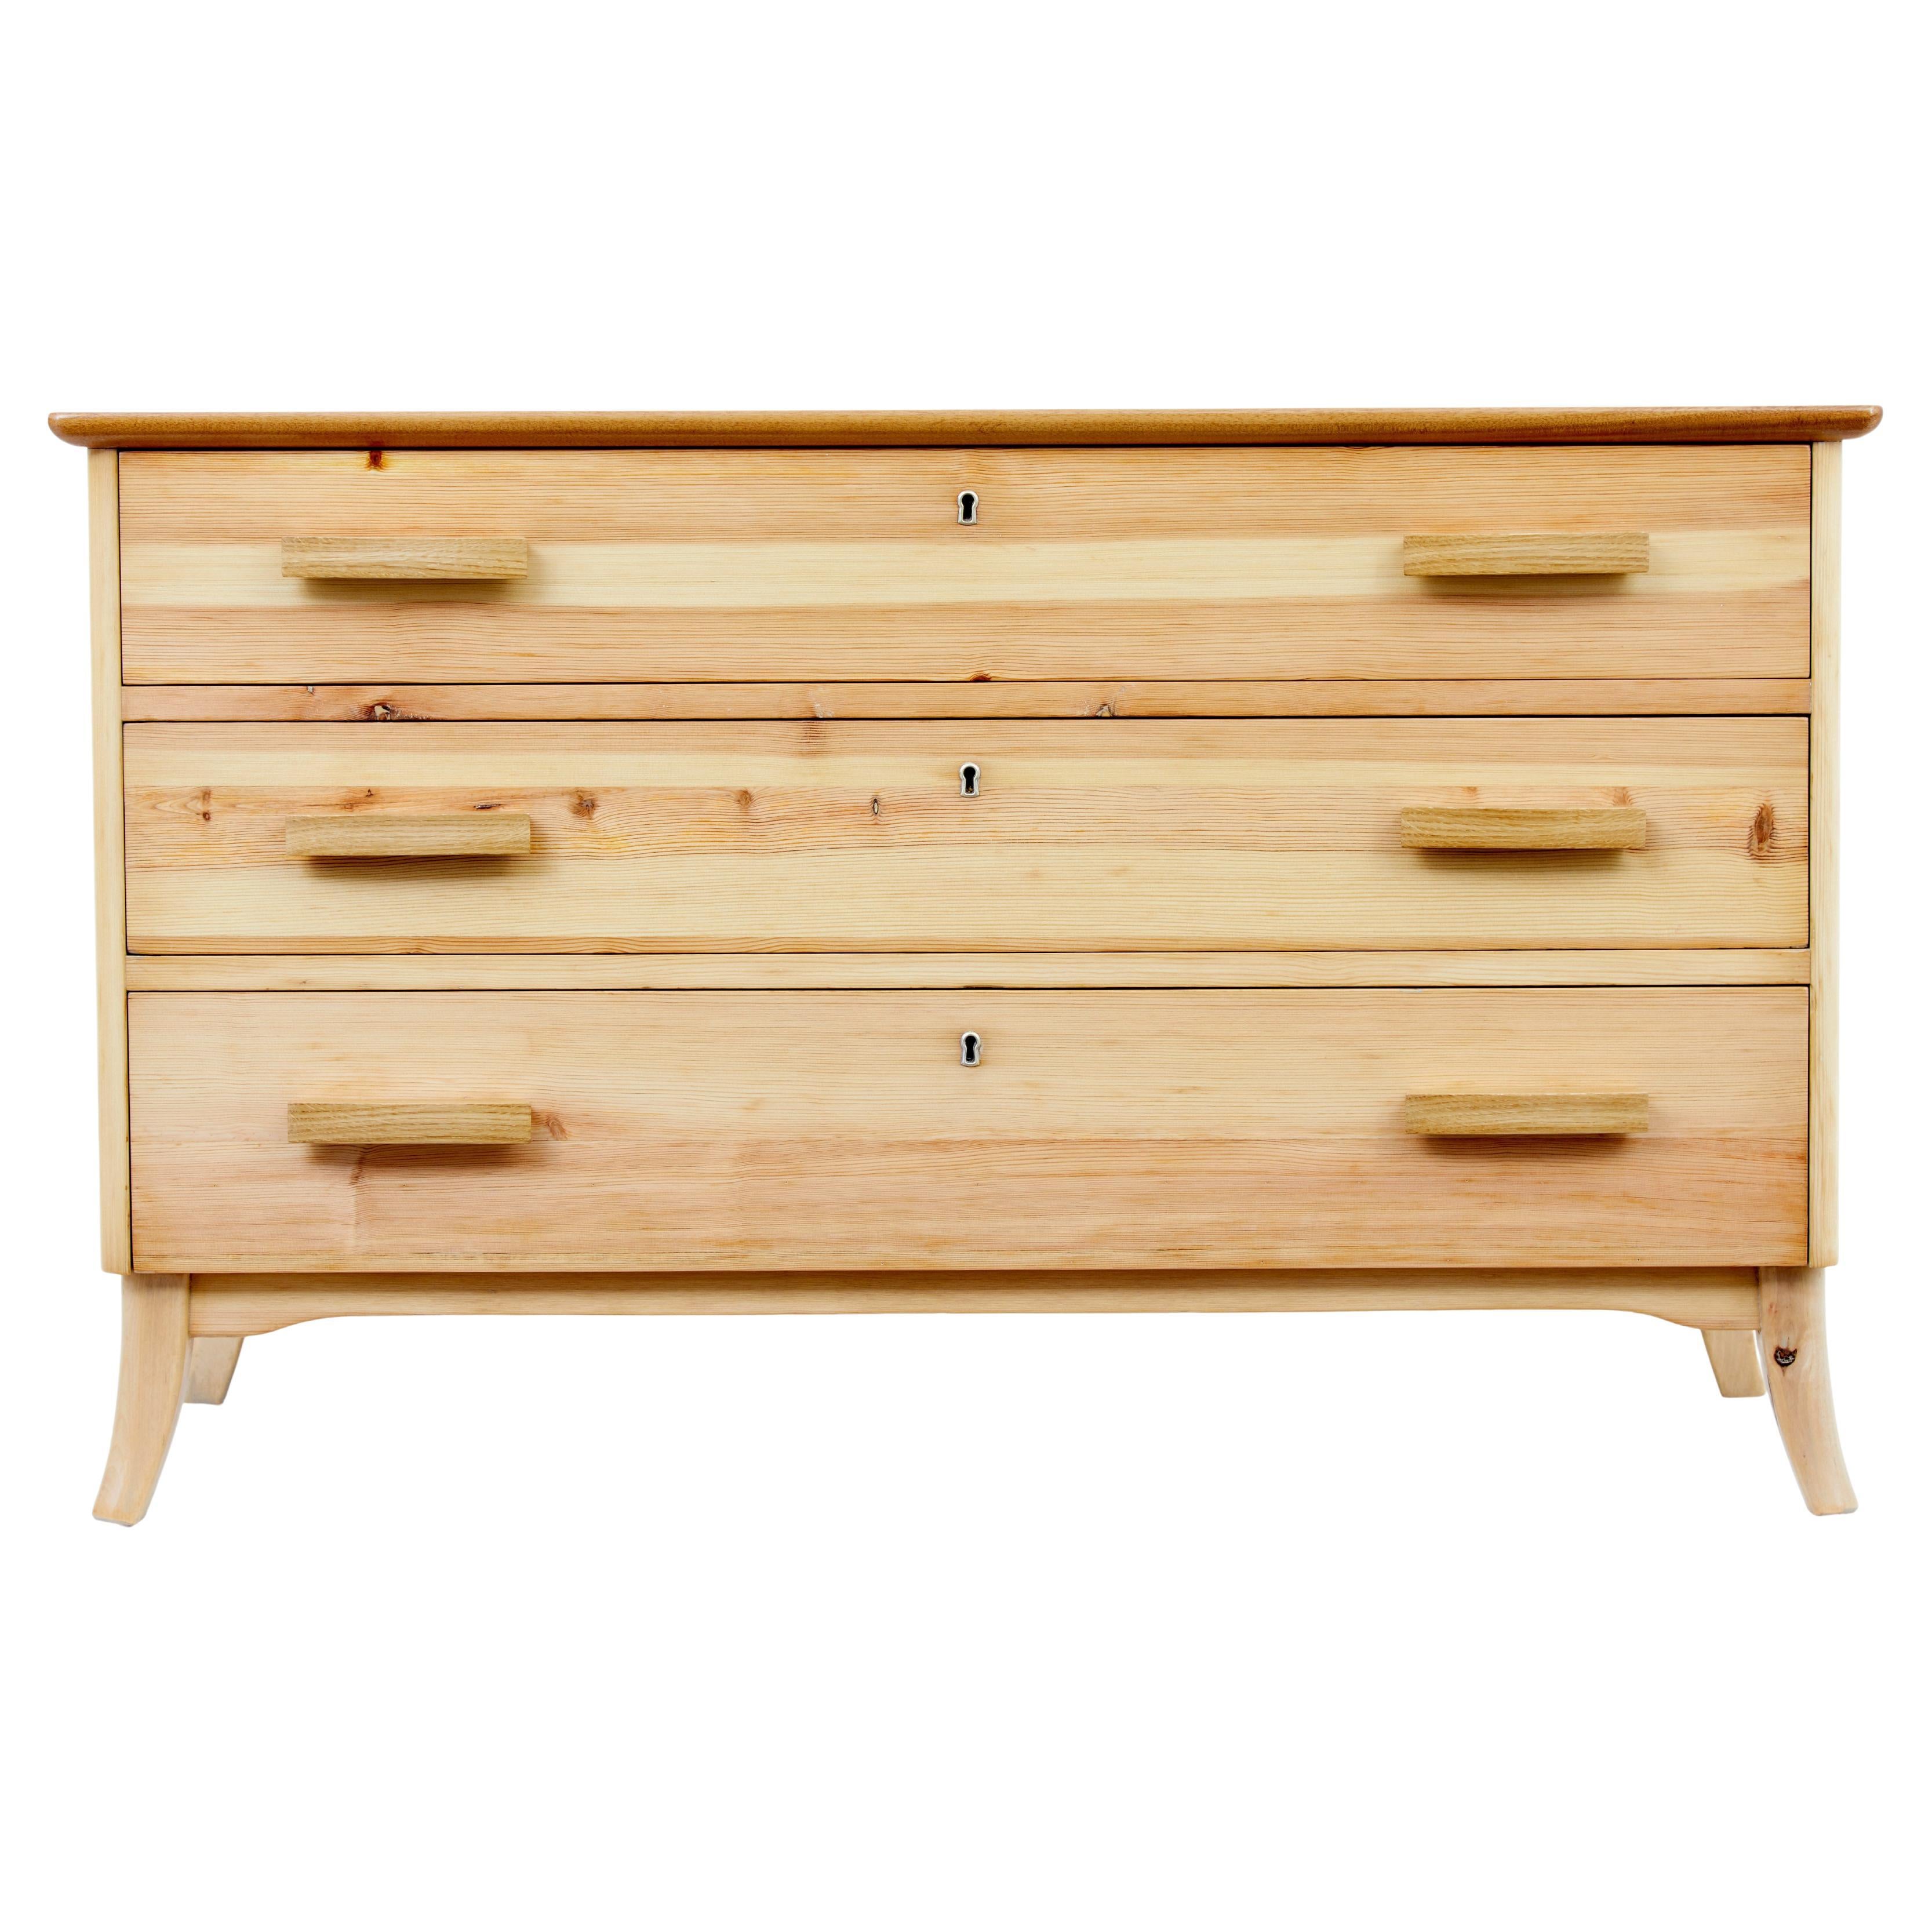 Mid 20th century Swedish pine chest of drawers For Sale